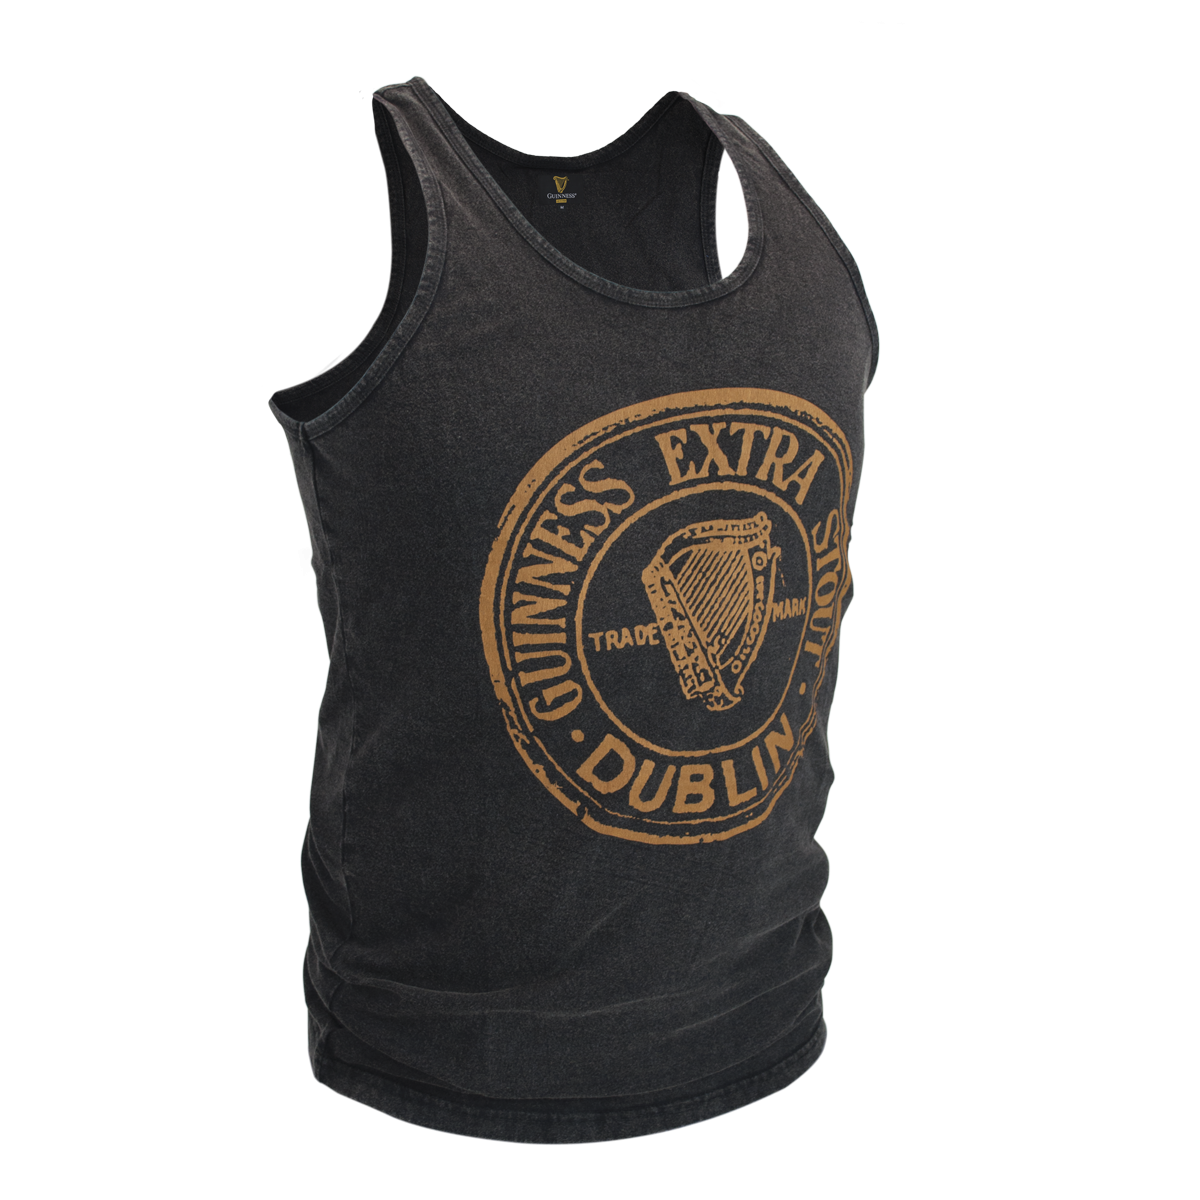 A Guinness Washed Extra Stout tank top perfect for the summer months.